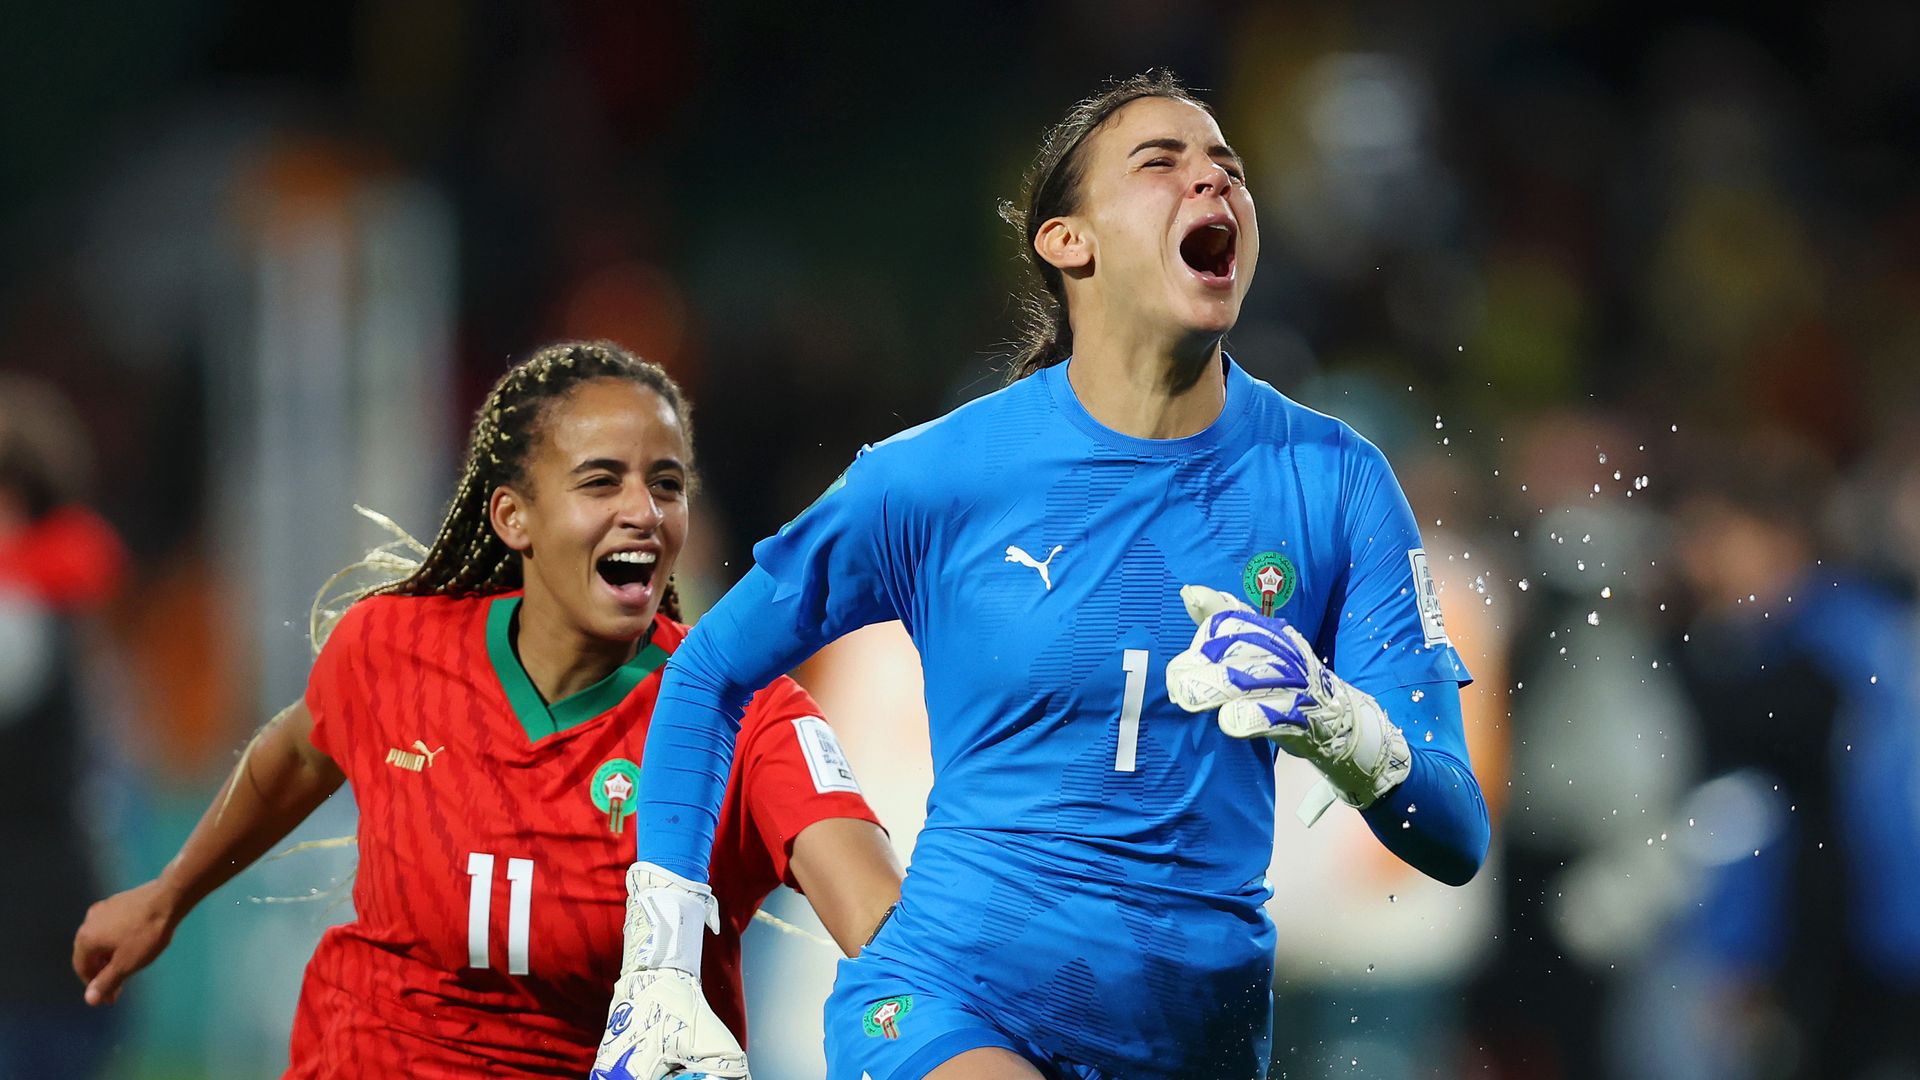 Inequality, tragedy & ceased funding: How low-ranked teams rose at WWC